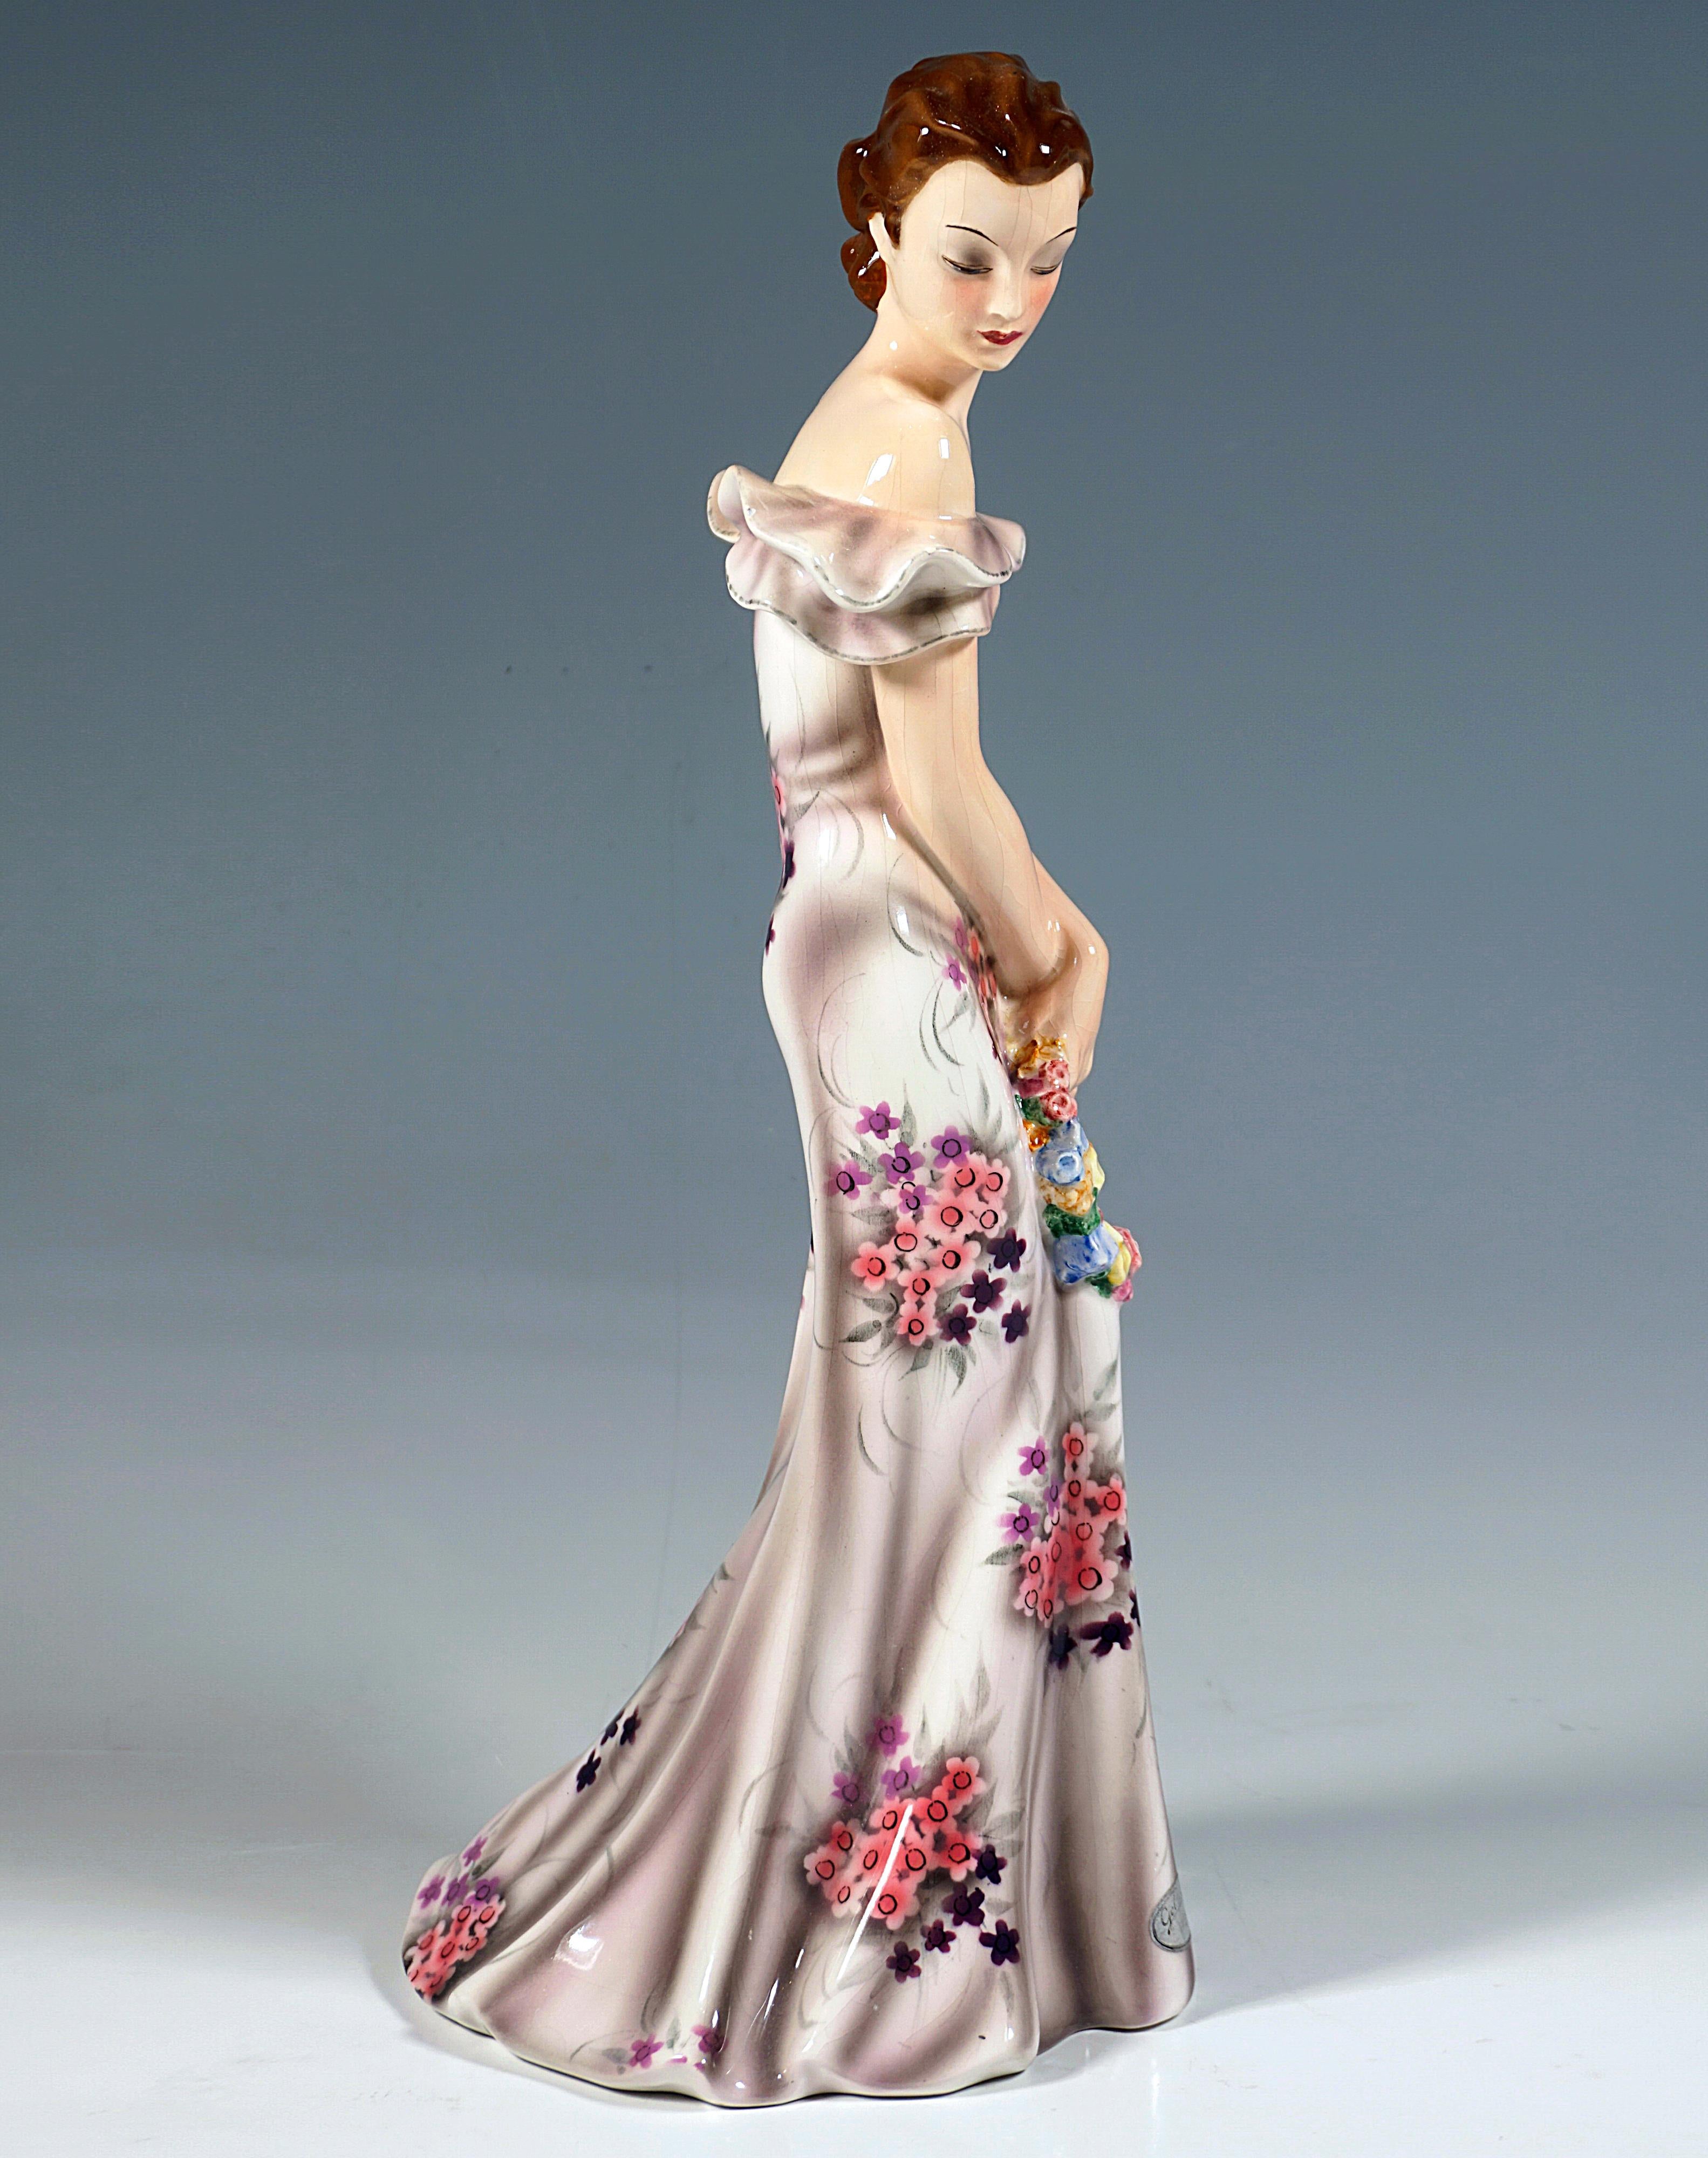 Rare Goldscheider Vienna Figurine of the late 1930s:
Representation of an elegant lady in a long, close-fitting, off-the-shoulder dress with a ruffled neckline made of rose-colored fabric with floral decoration and a floor-length, wide skirt, her